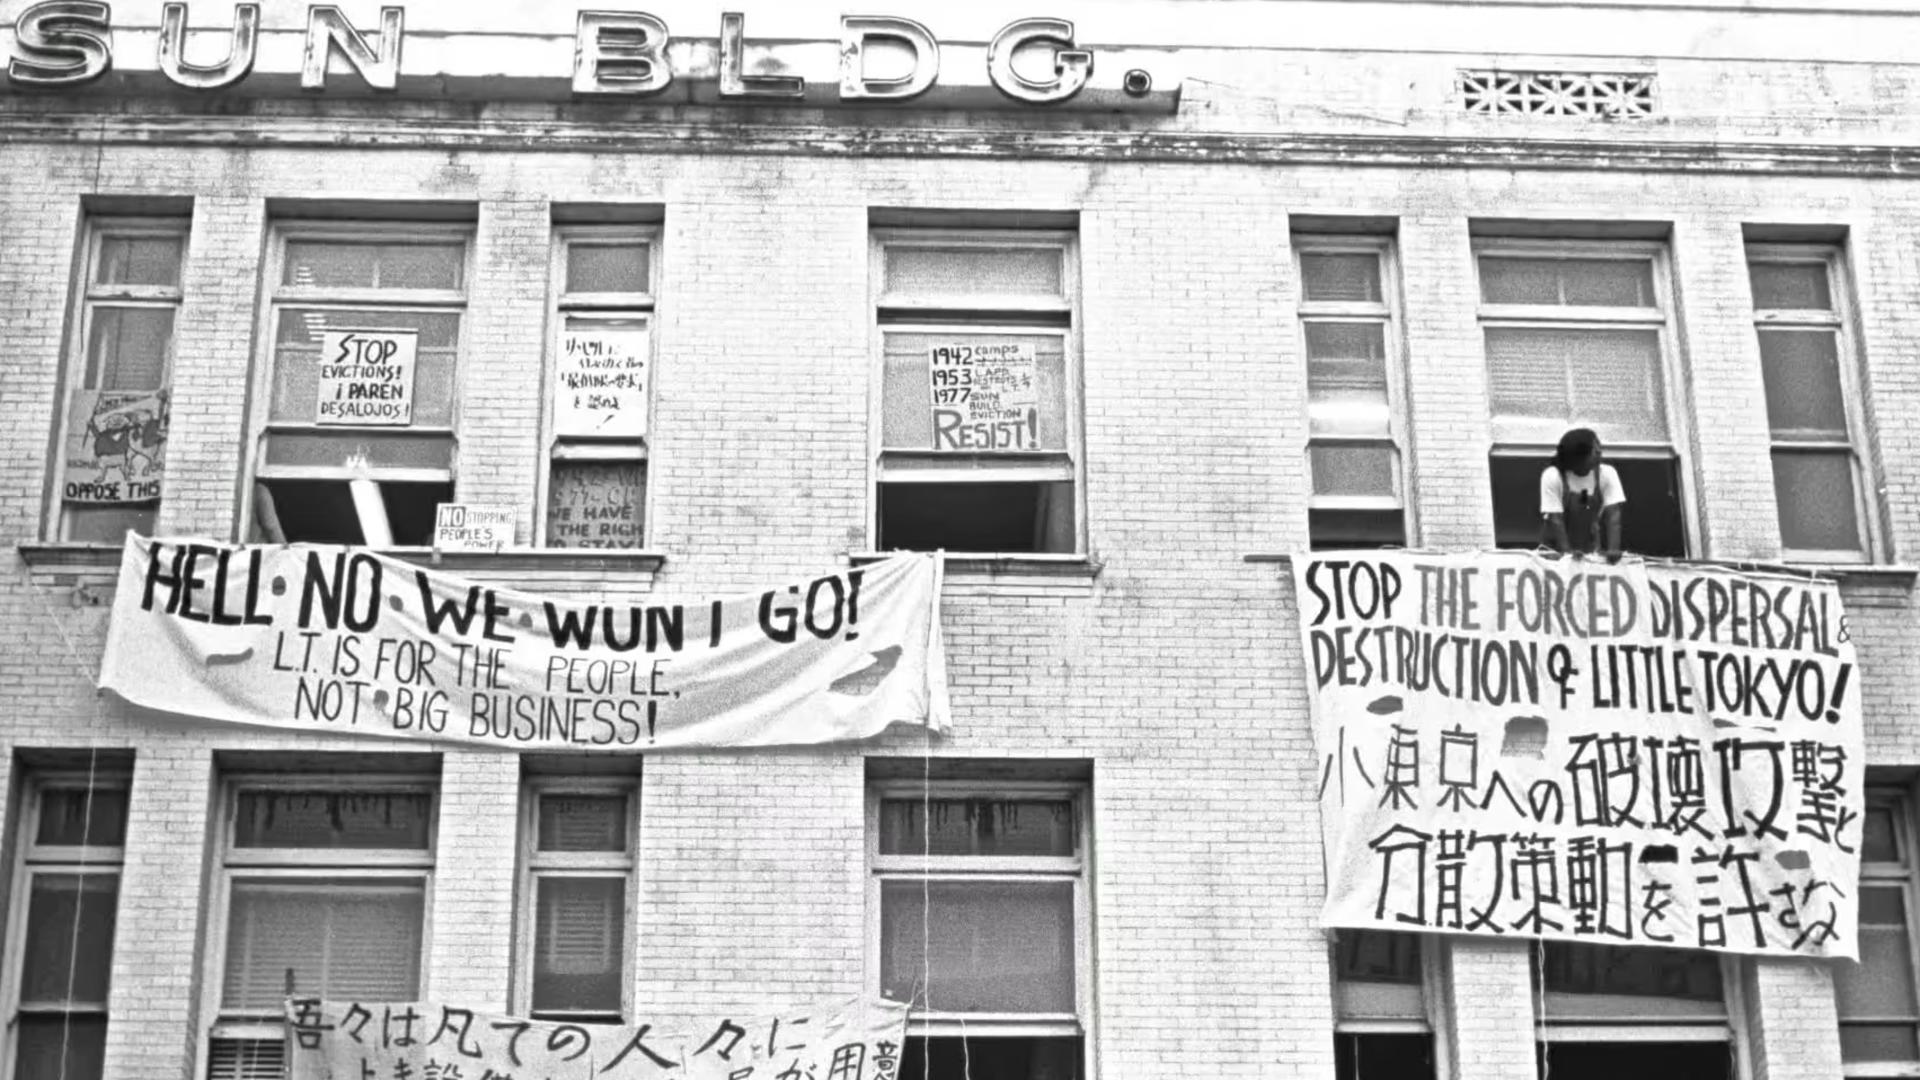 1970s: THE FIGHT FOR LITTLE TOKYO